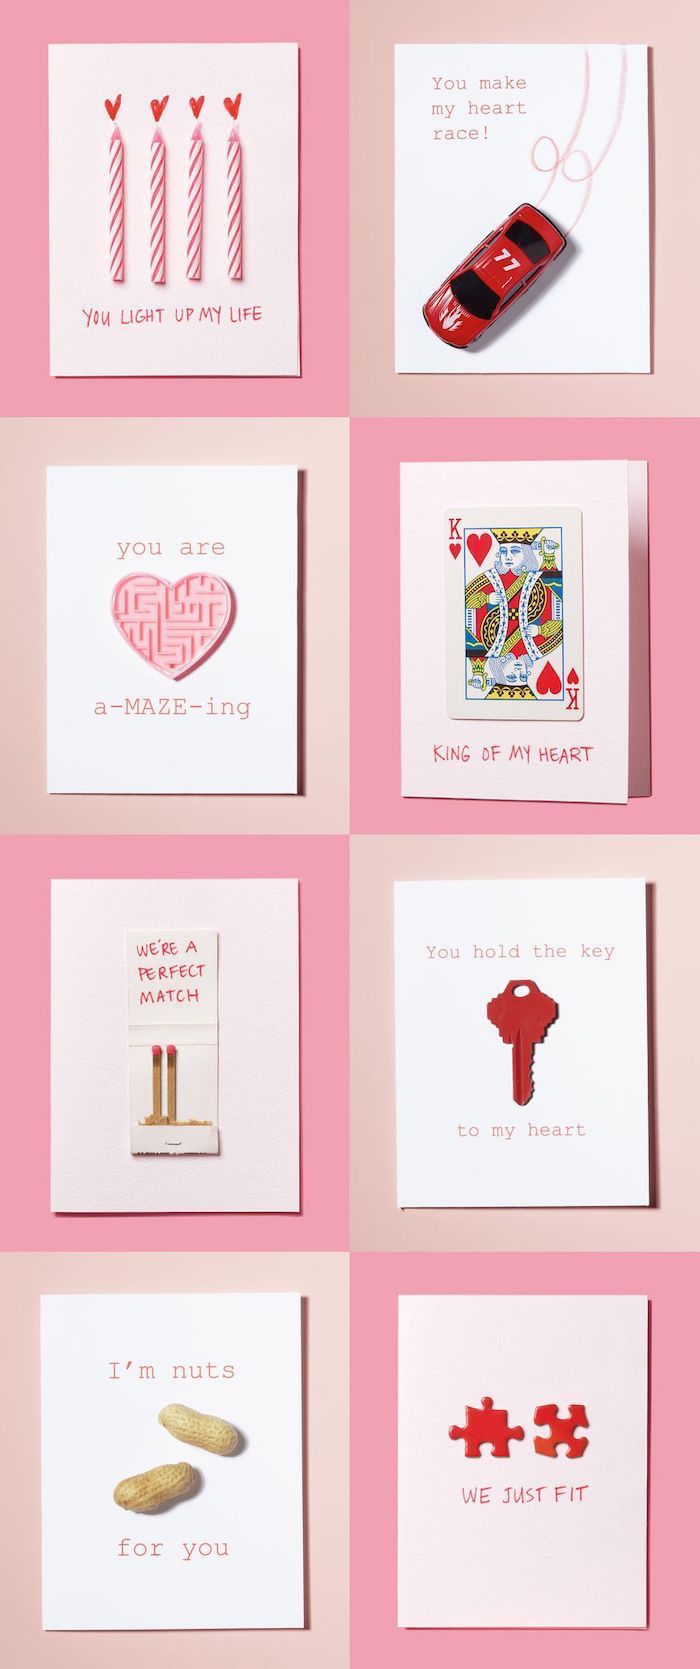 valentine's day handmade cards, special funny messages, creative valentine's day gifts for boyfriend